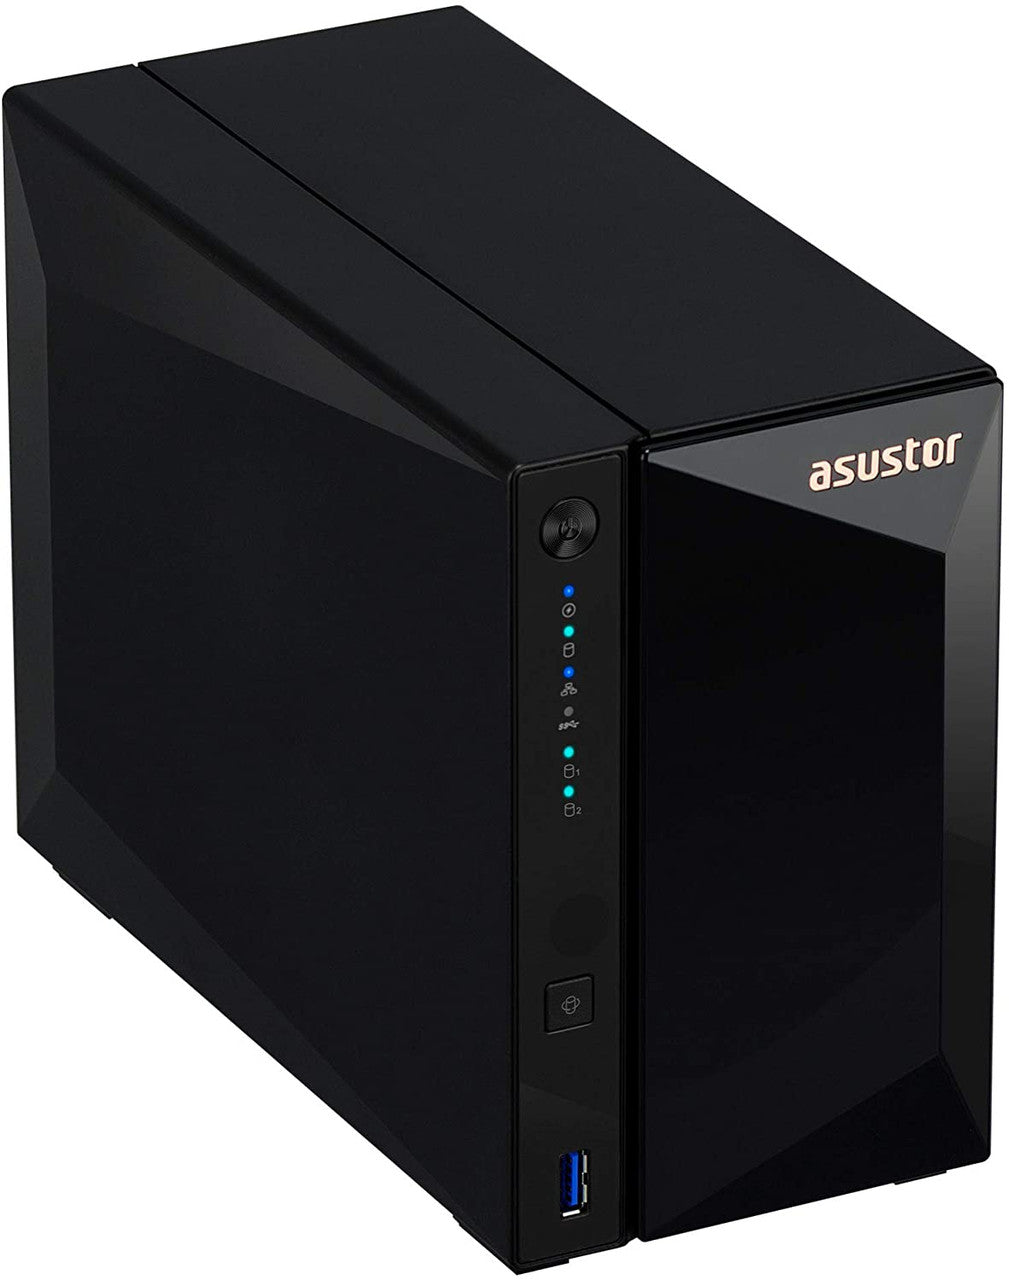 Asustor AS3302T 2-Bay Drivestor 2 PRO NAS with 2GB RAM and 20TB (2x10TB) Seagate Ironwolf PRO Drives Fully Assembled and Tested